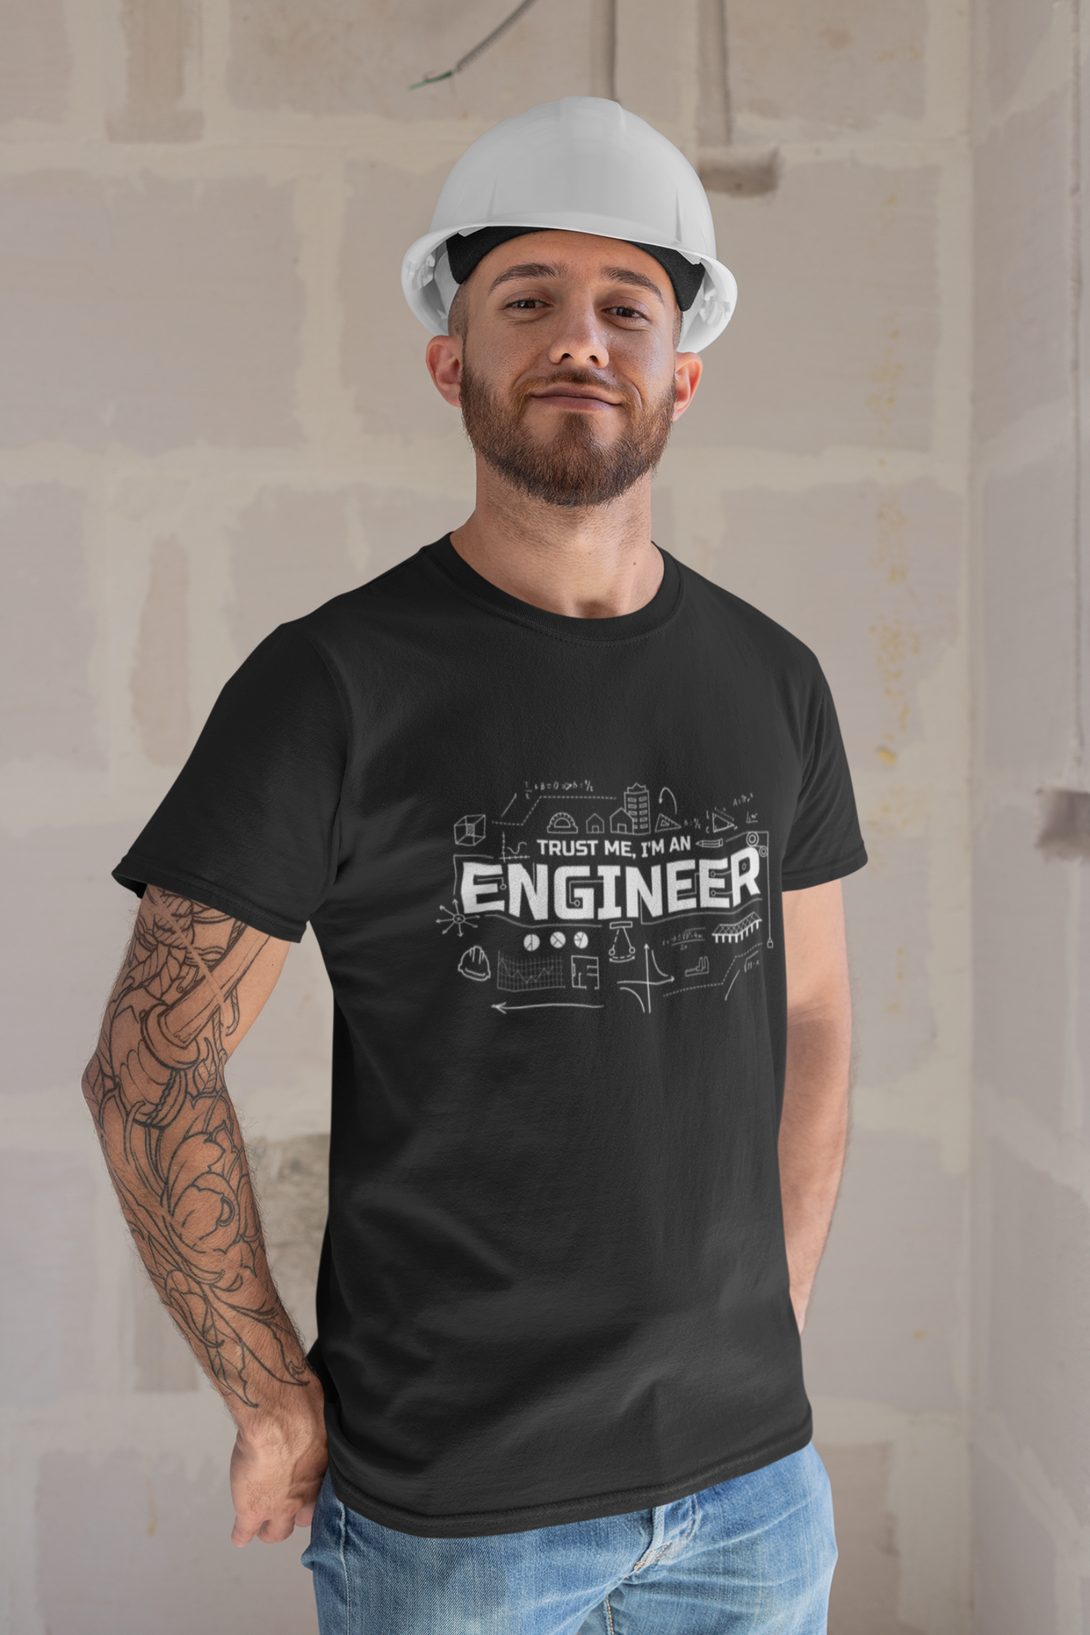 Trust Me, I'M An Engineer Printed T-Shirt For Men - WowWaves - 7